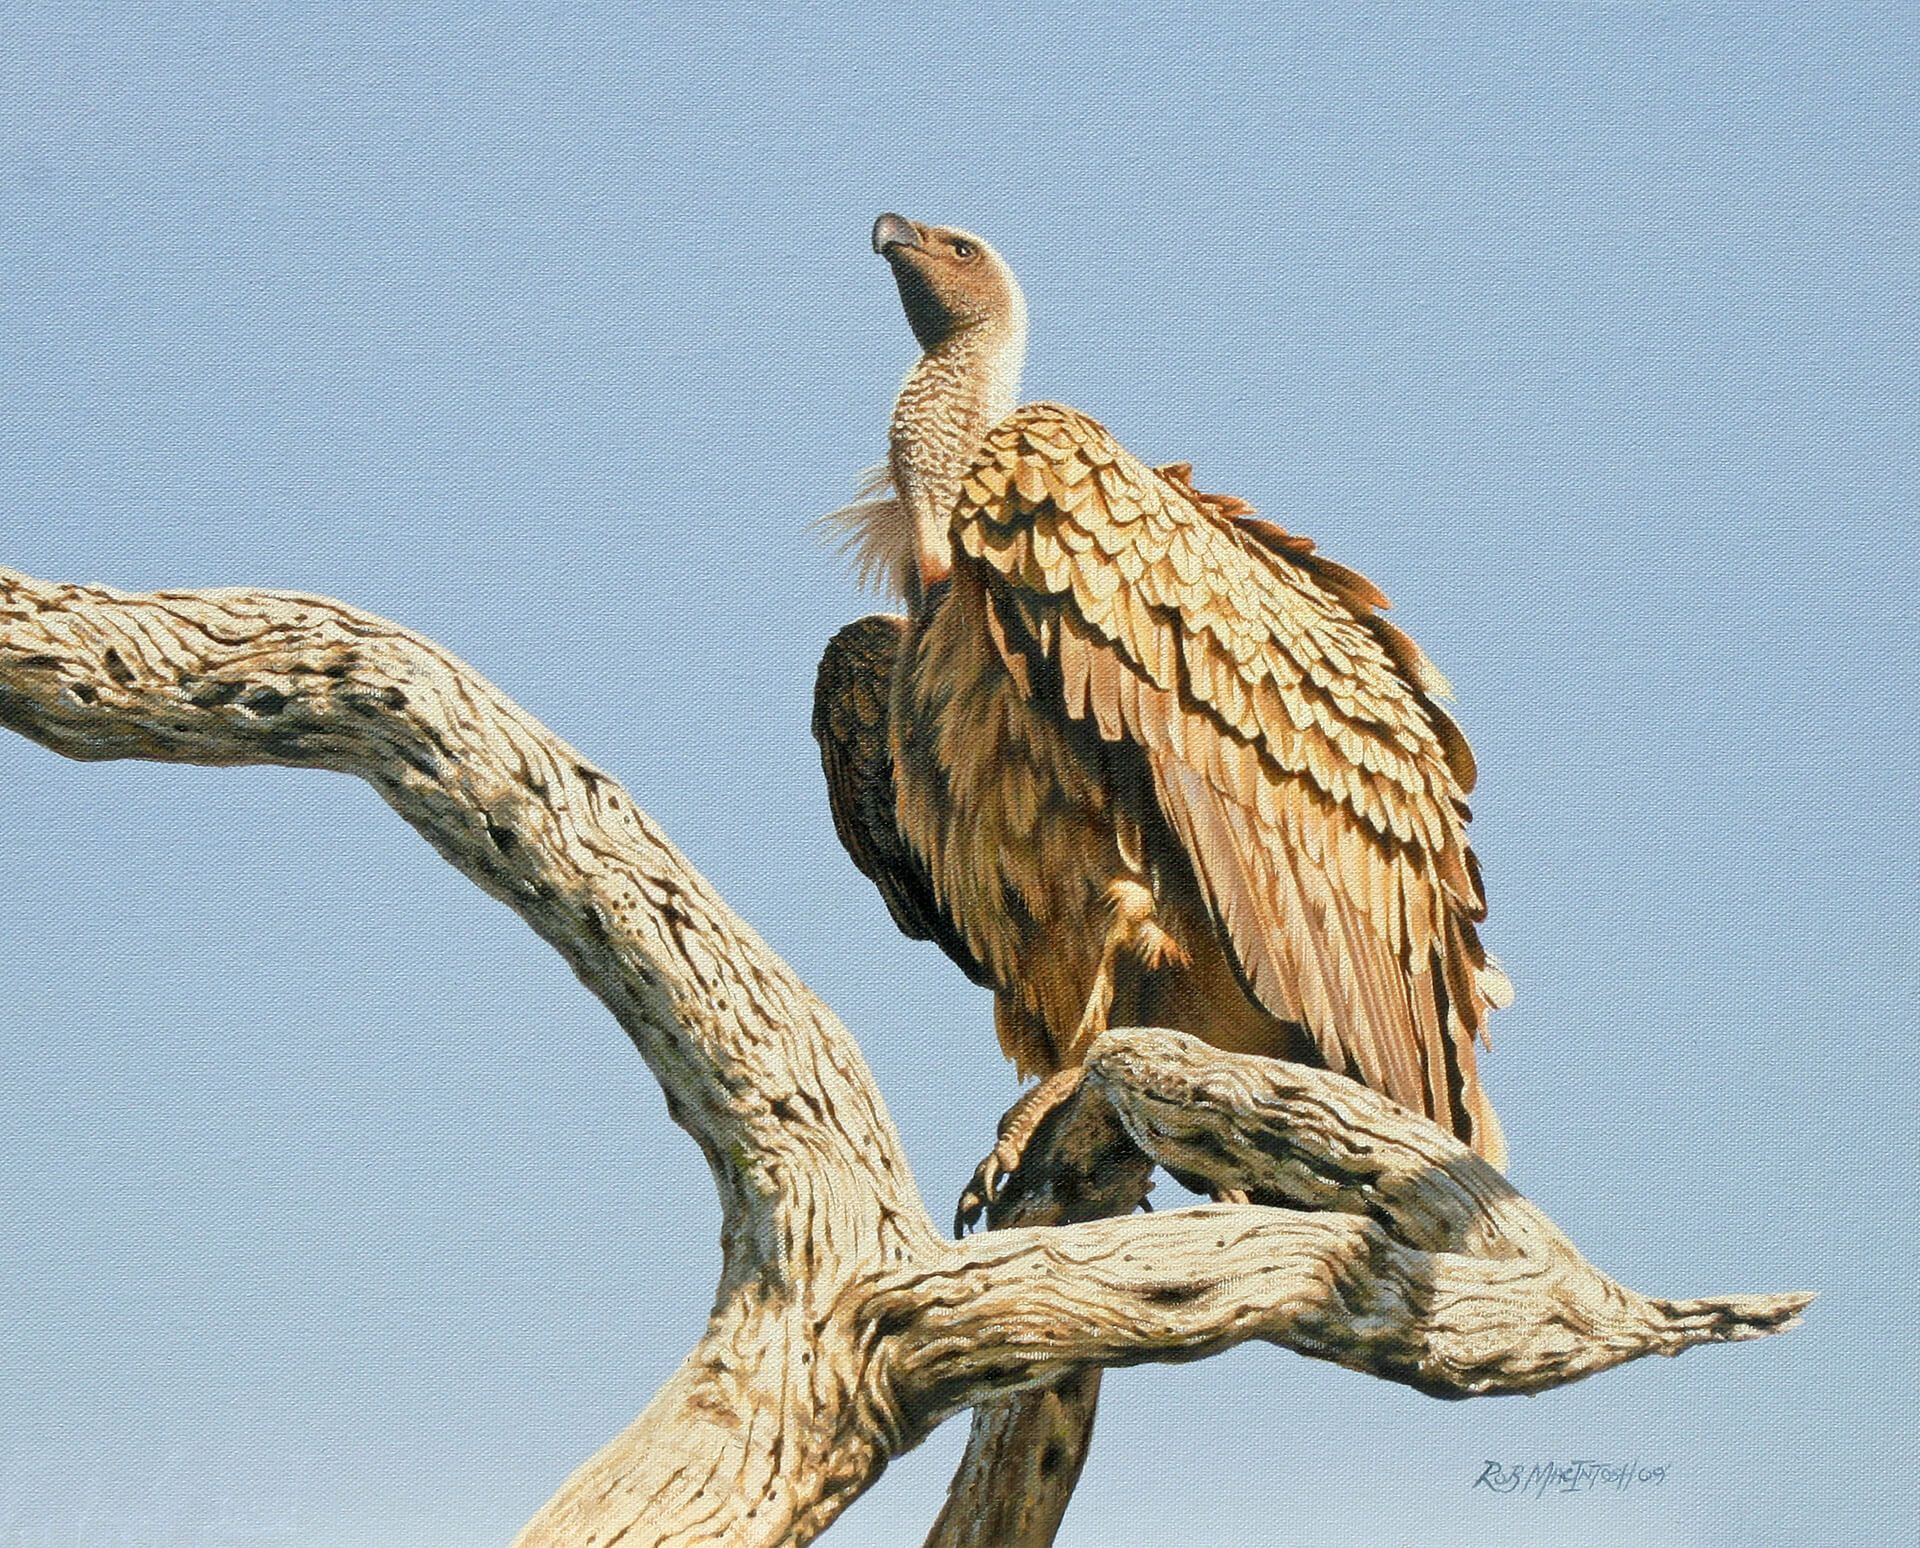 Photorealistic painting of a vulture perched in a tree